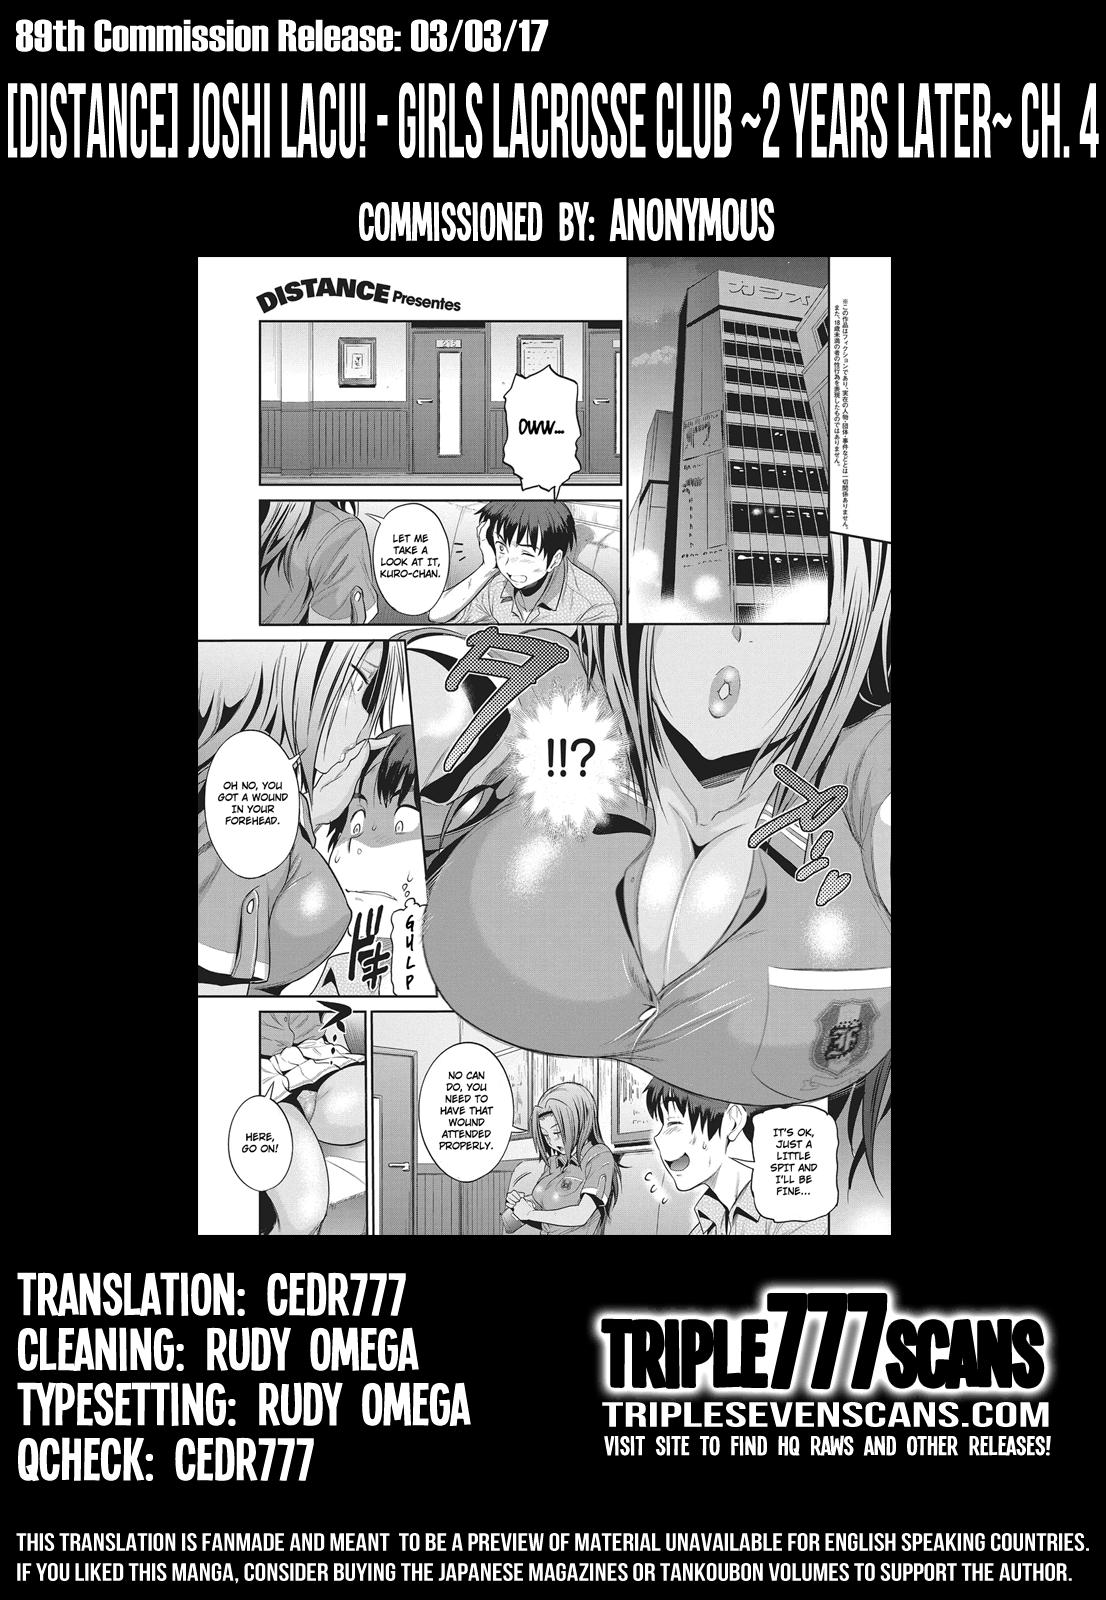 [DISTANCE] Joshi Lacu! - Girls Lacrosse Club ~2 Years Later~ Ch. 4 (COMIC ExE 05) [English] [TripleSevenScans] [Digital] 42